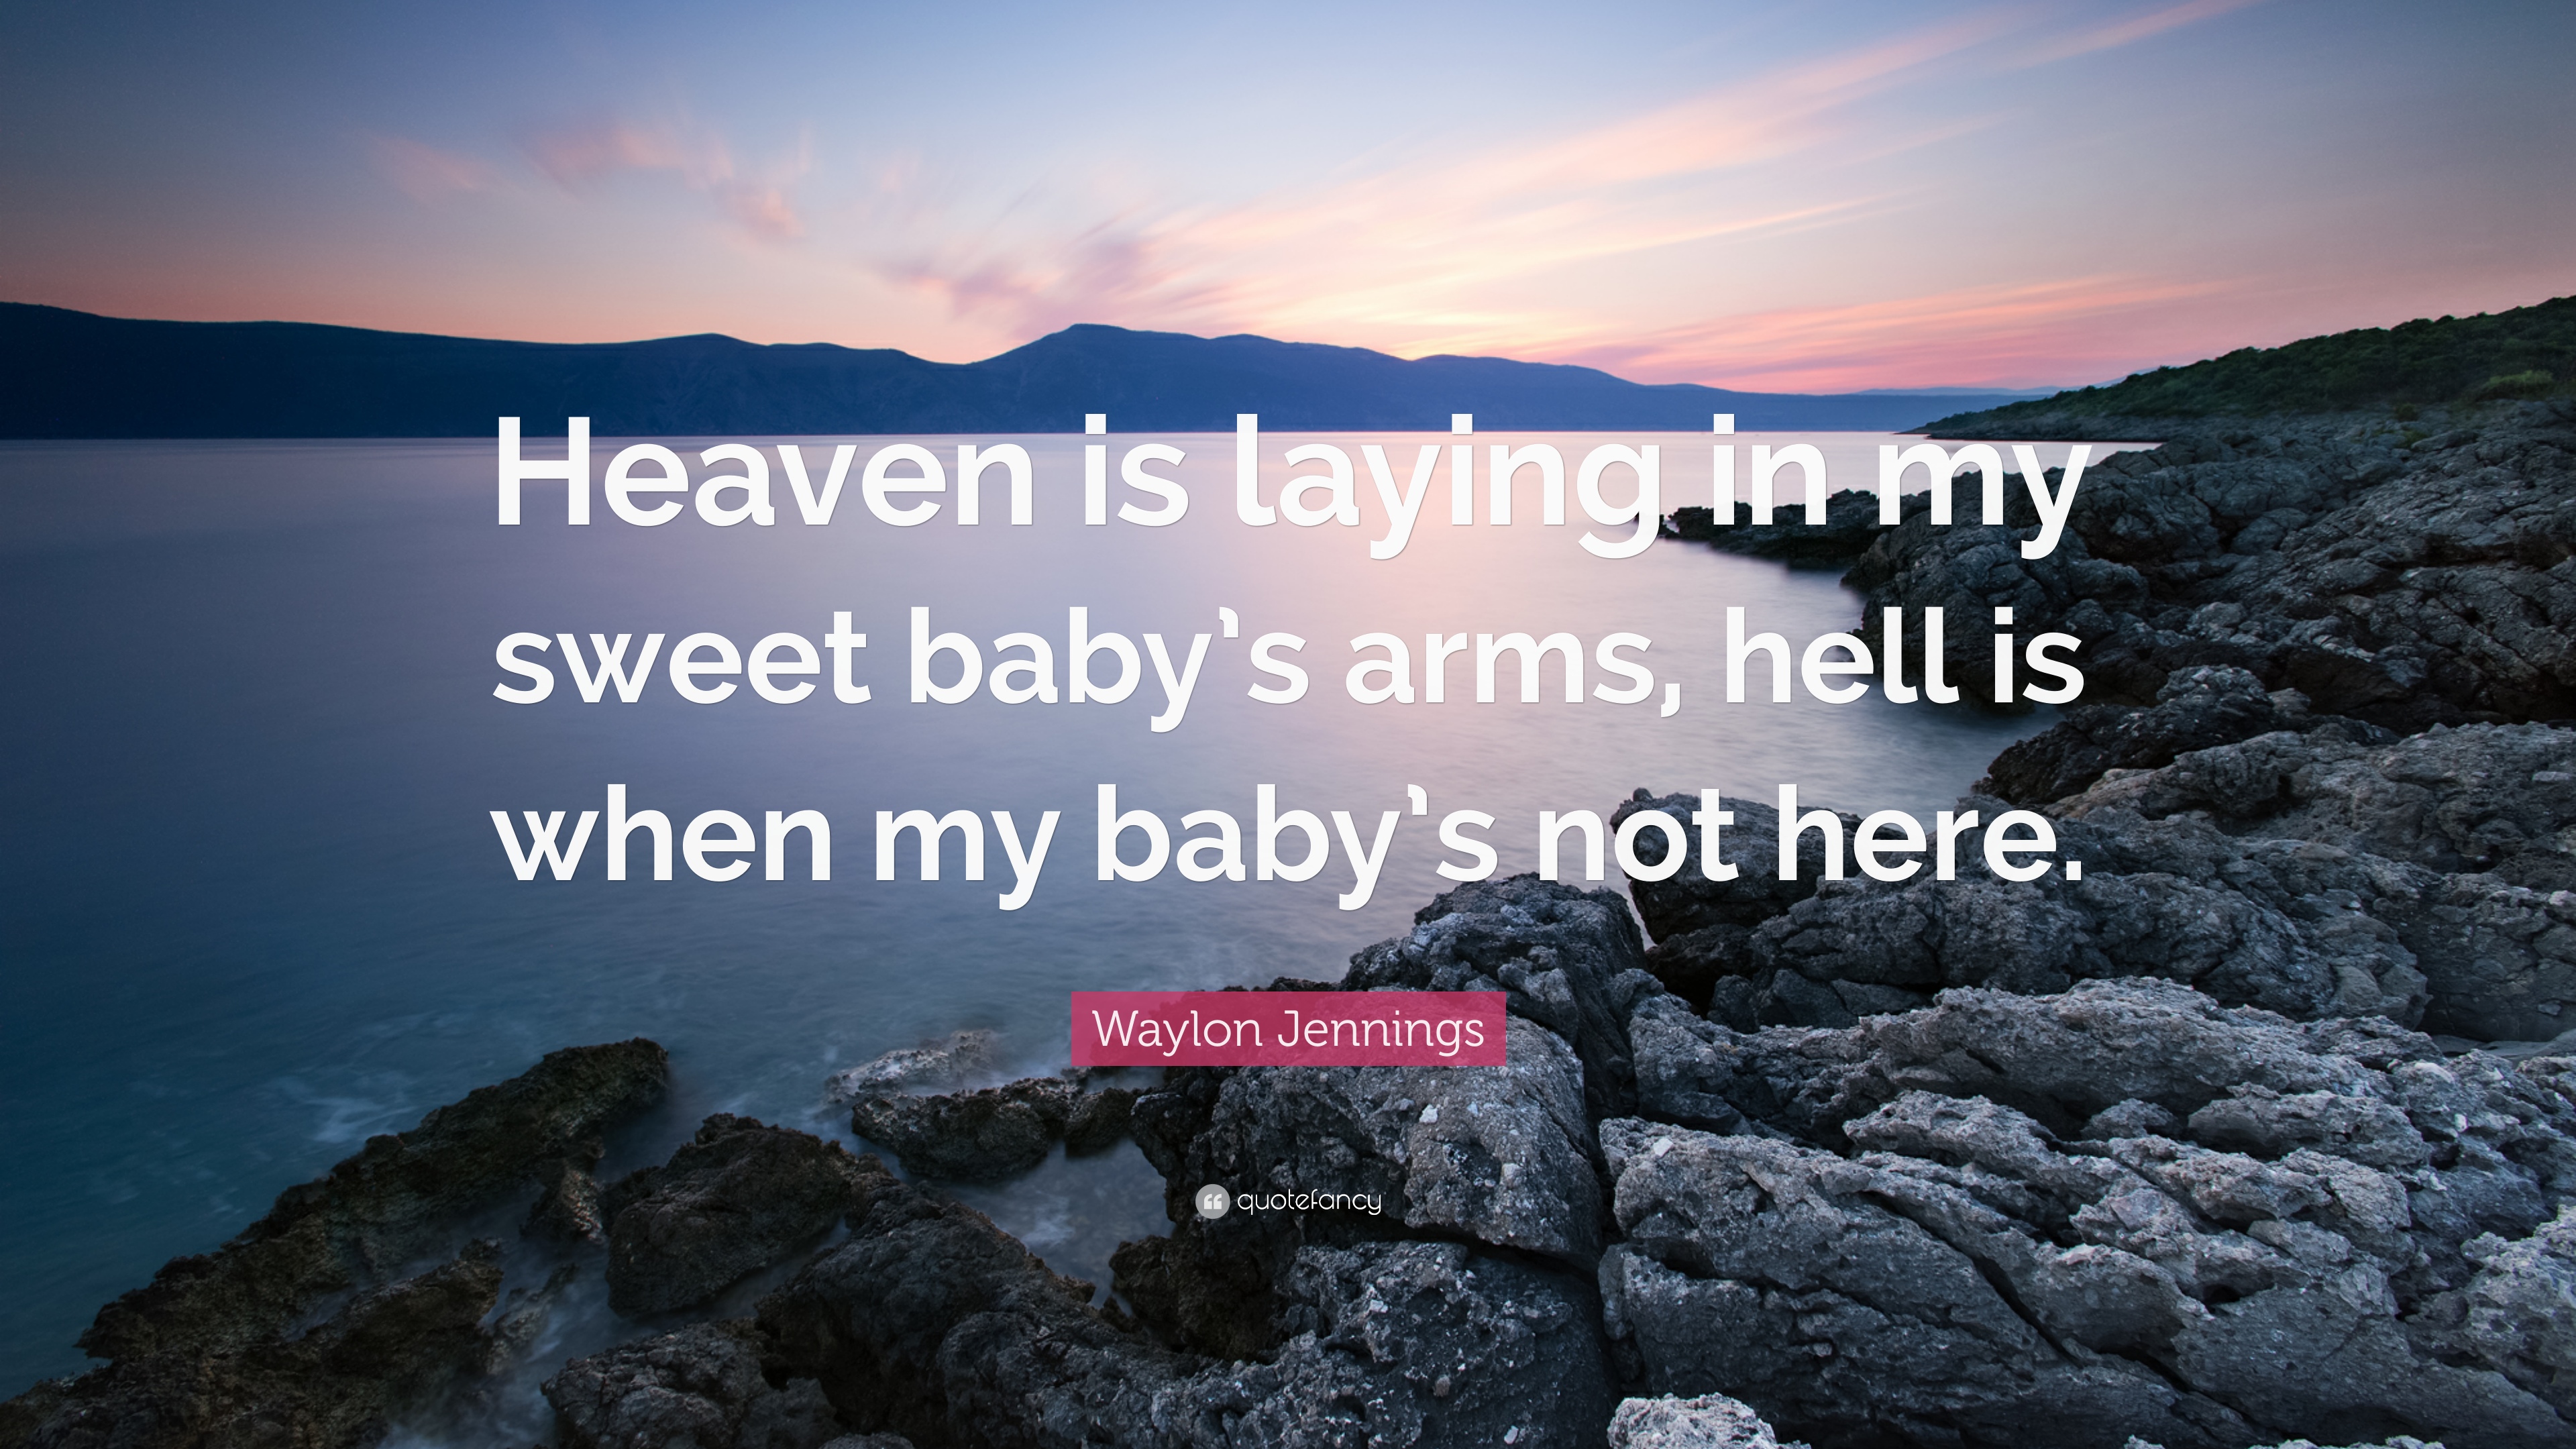 Waylon Jennings Quote: “Heaven is laying in my sweet baby's arms